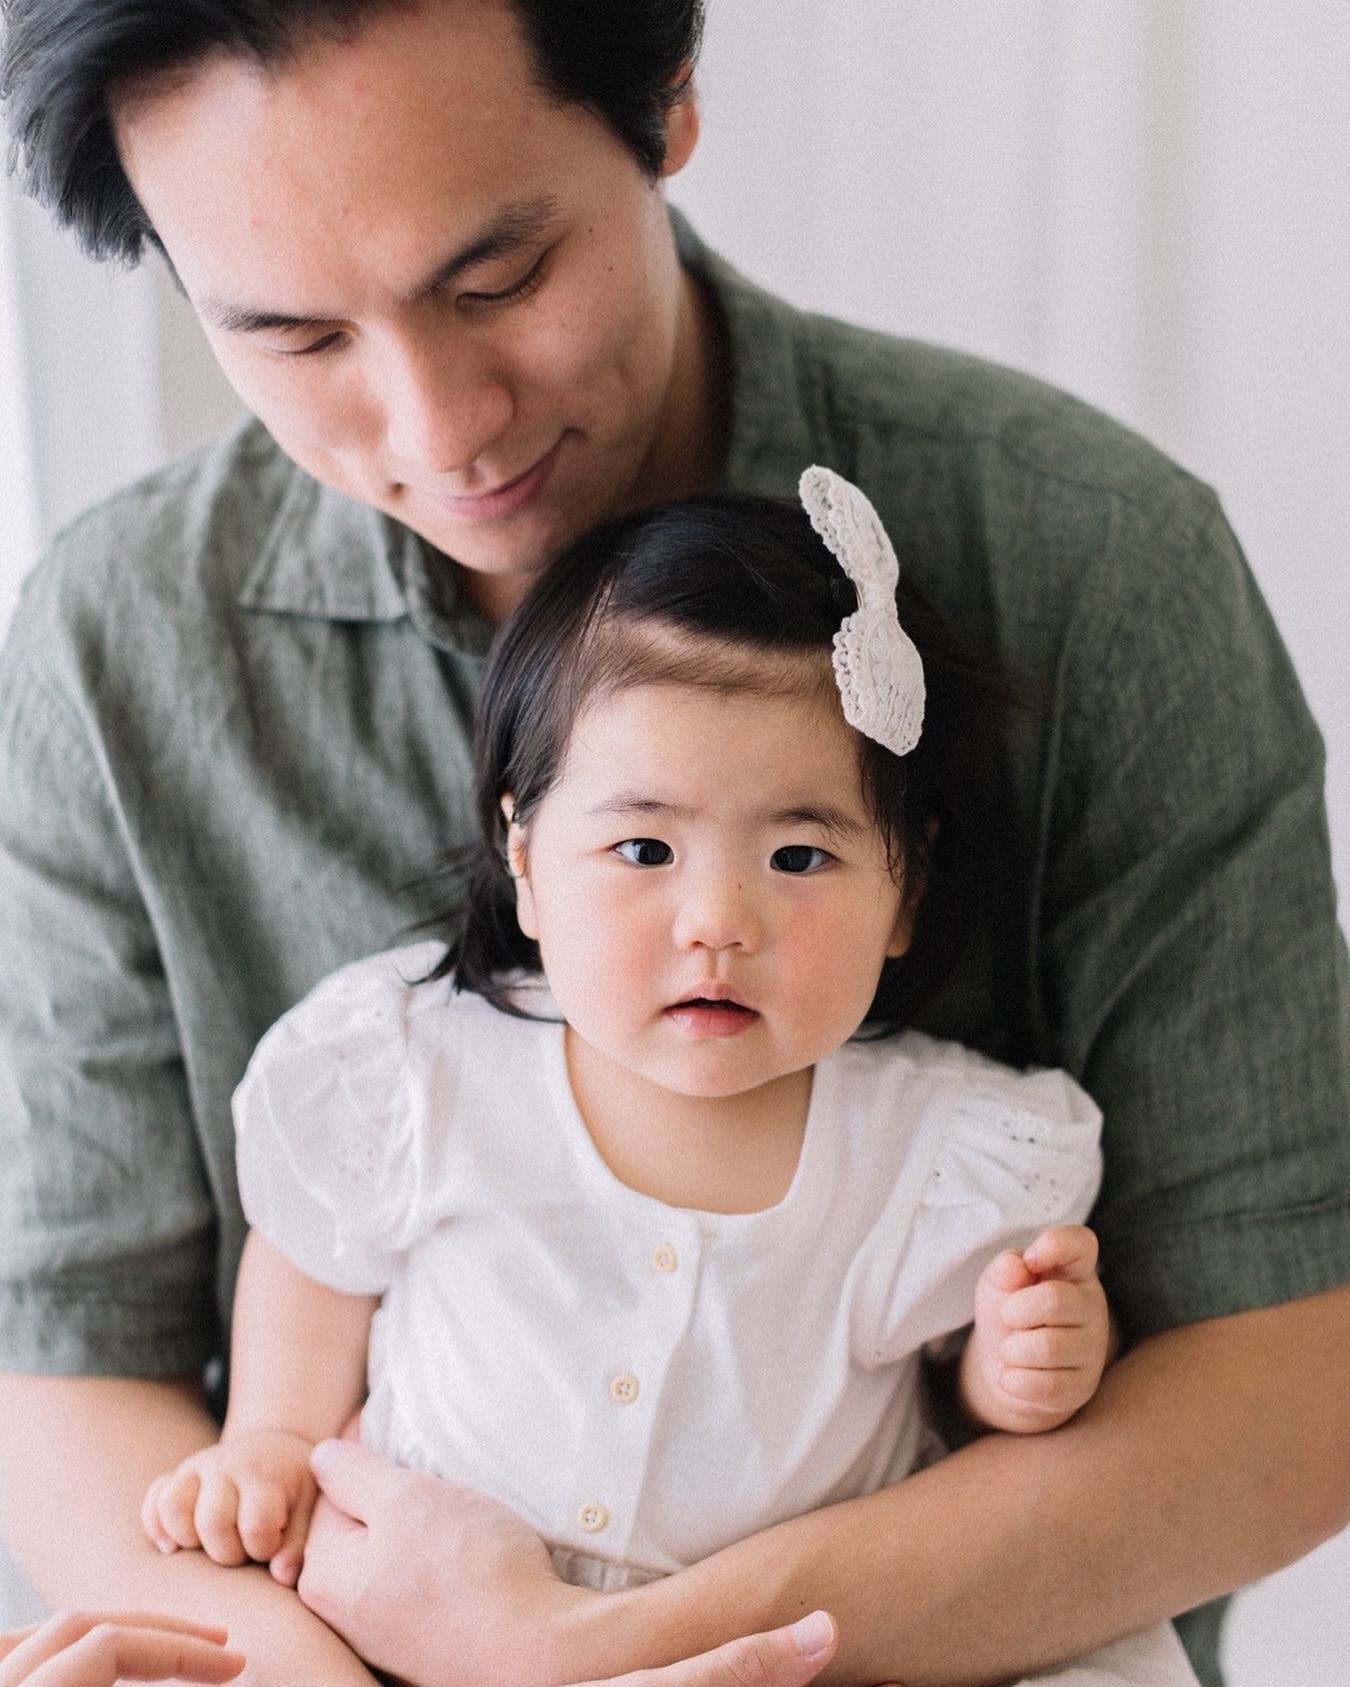 A little daddy-daughter moment from Sunny&rsquo;s first birthday shoot. (Fun fact: Sunny&rsquo;s amazing mama has looked after both George and Violet at their little daycare, we are so lucky to have our little ones in her care. ) 
⠀⠀⠀⠀⠀⠀⠀⠀⠀
⠀⠀⠀⠀⠀⠀⠀⠀⠀